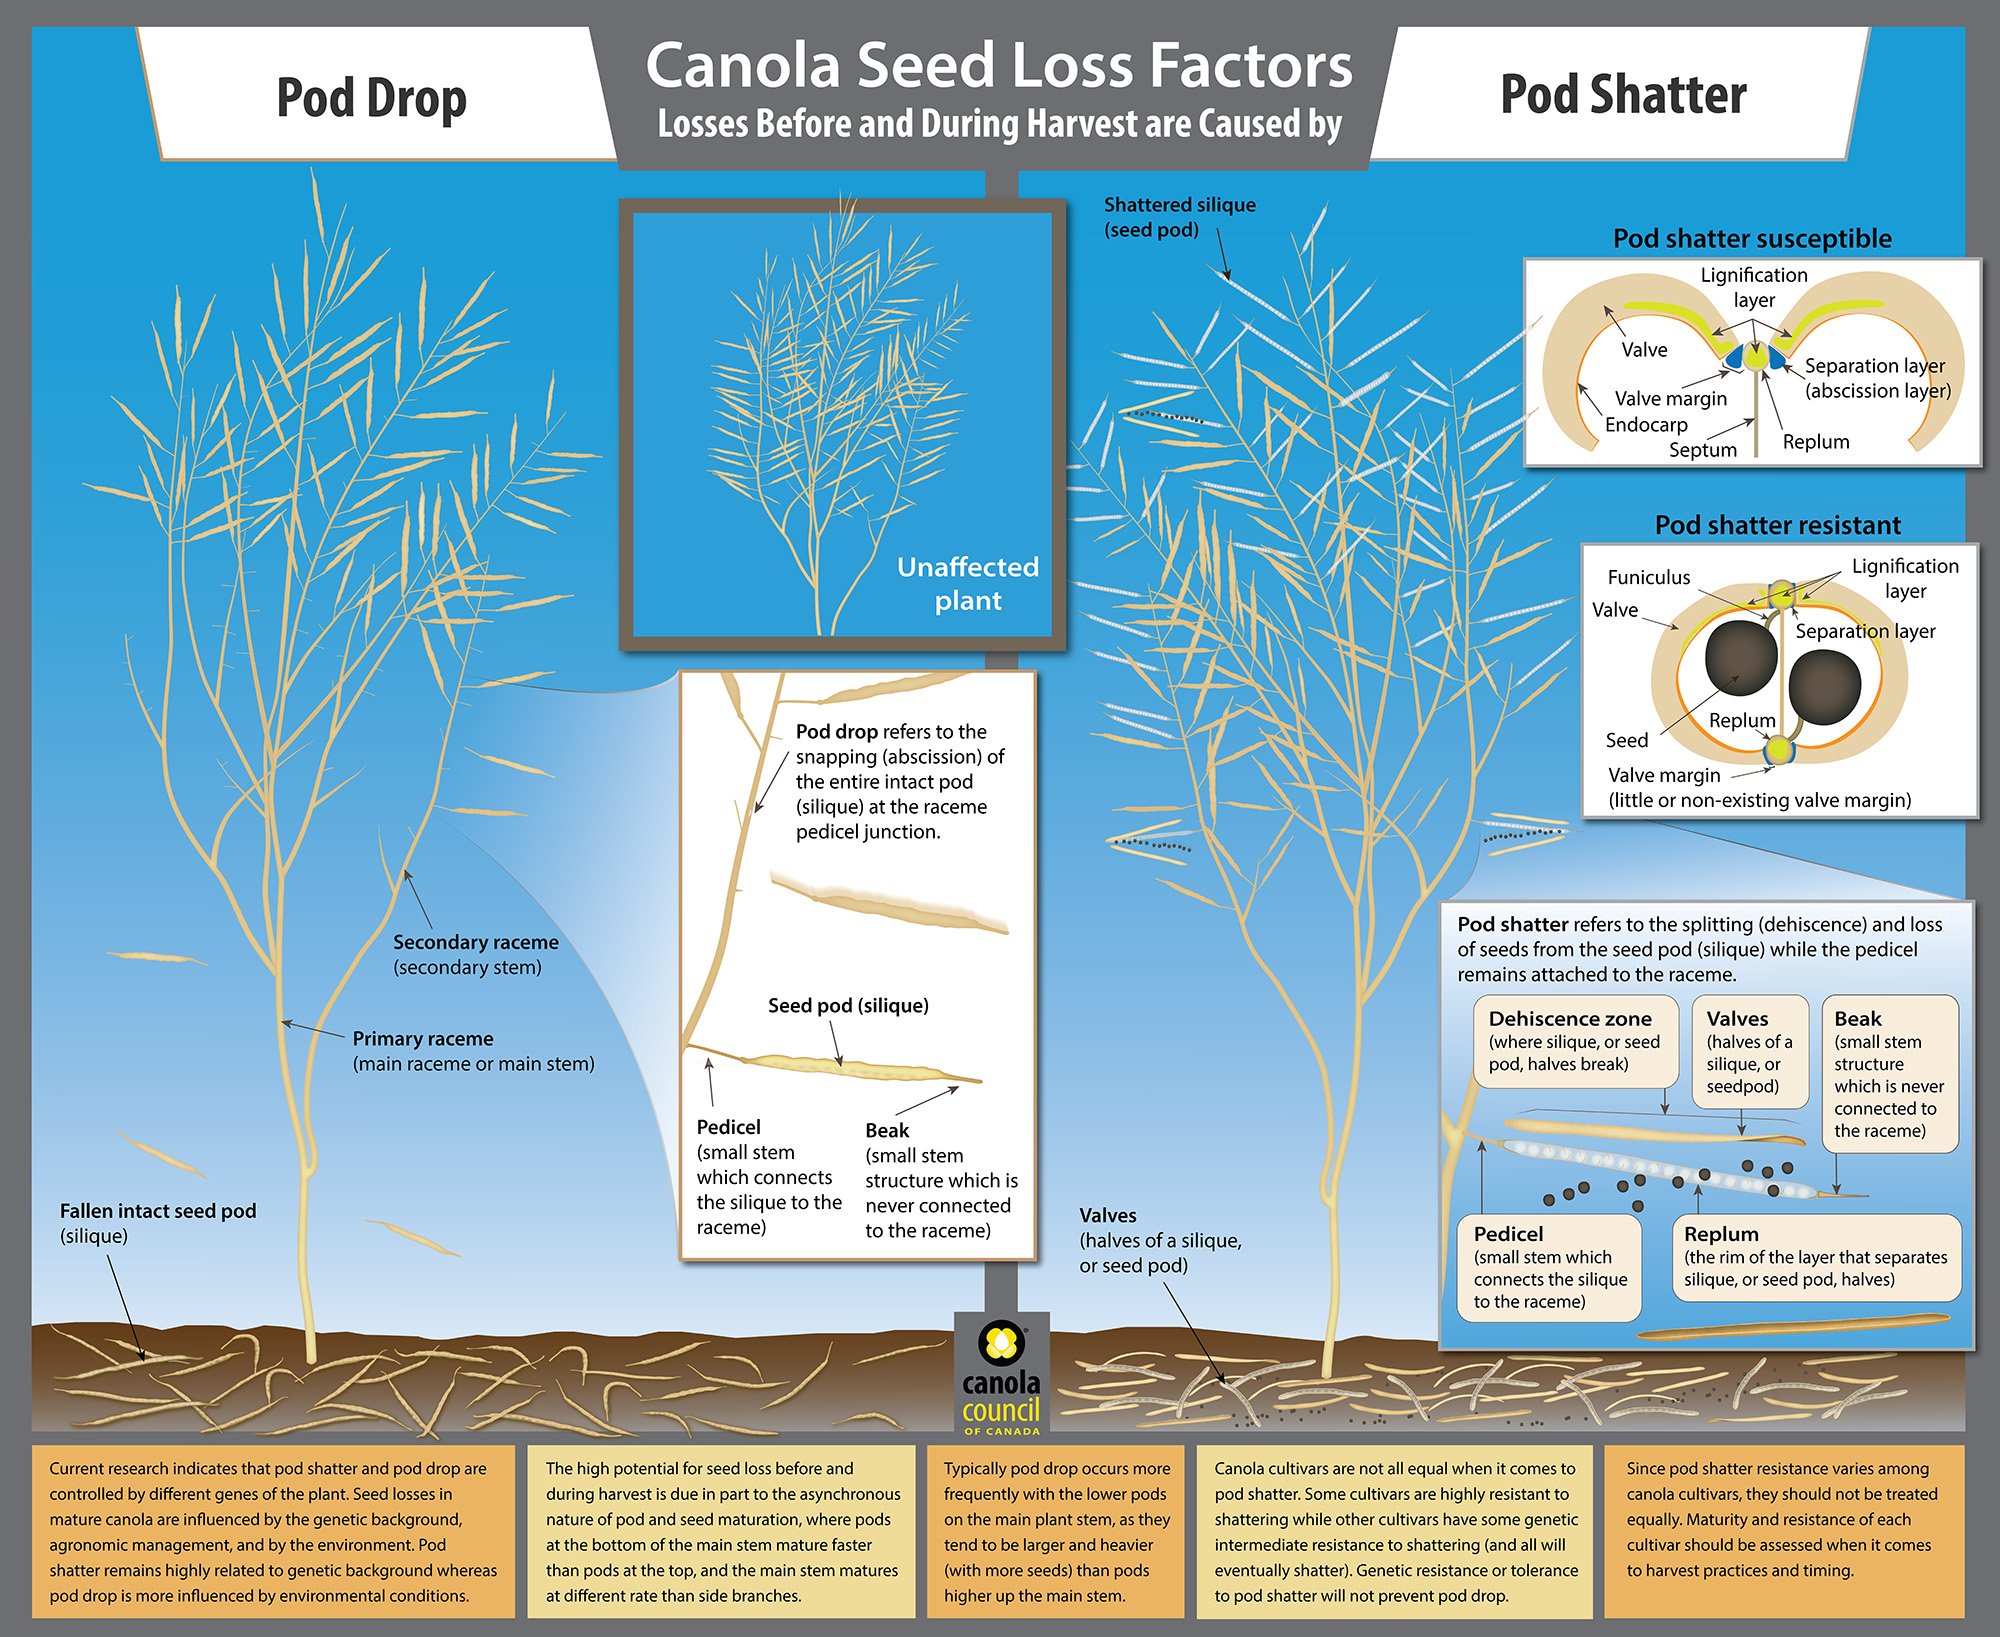 Canola Seed Loss Factors Illustration for the Canola Council of Canada